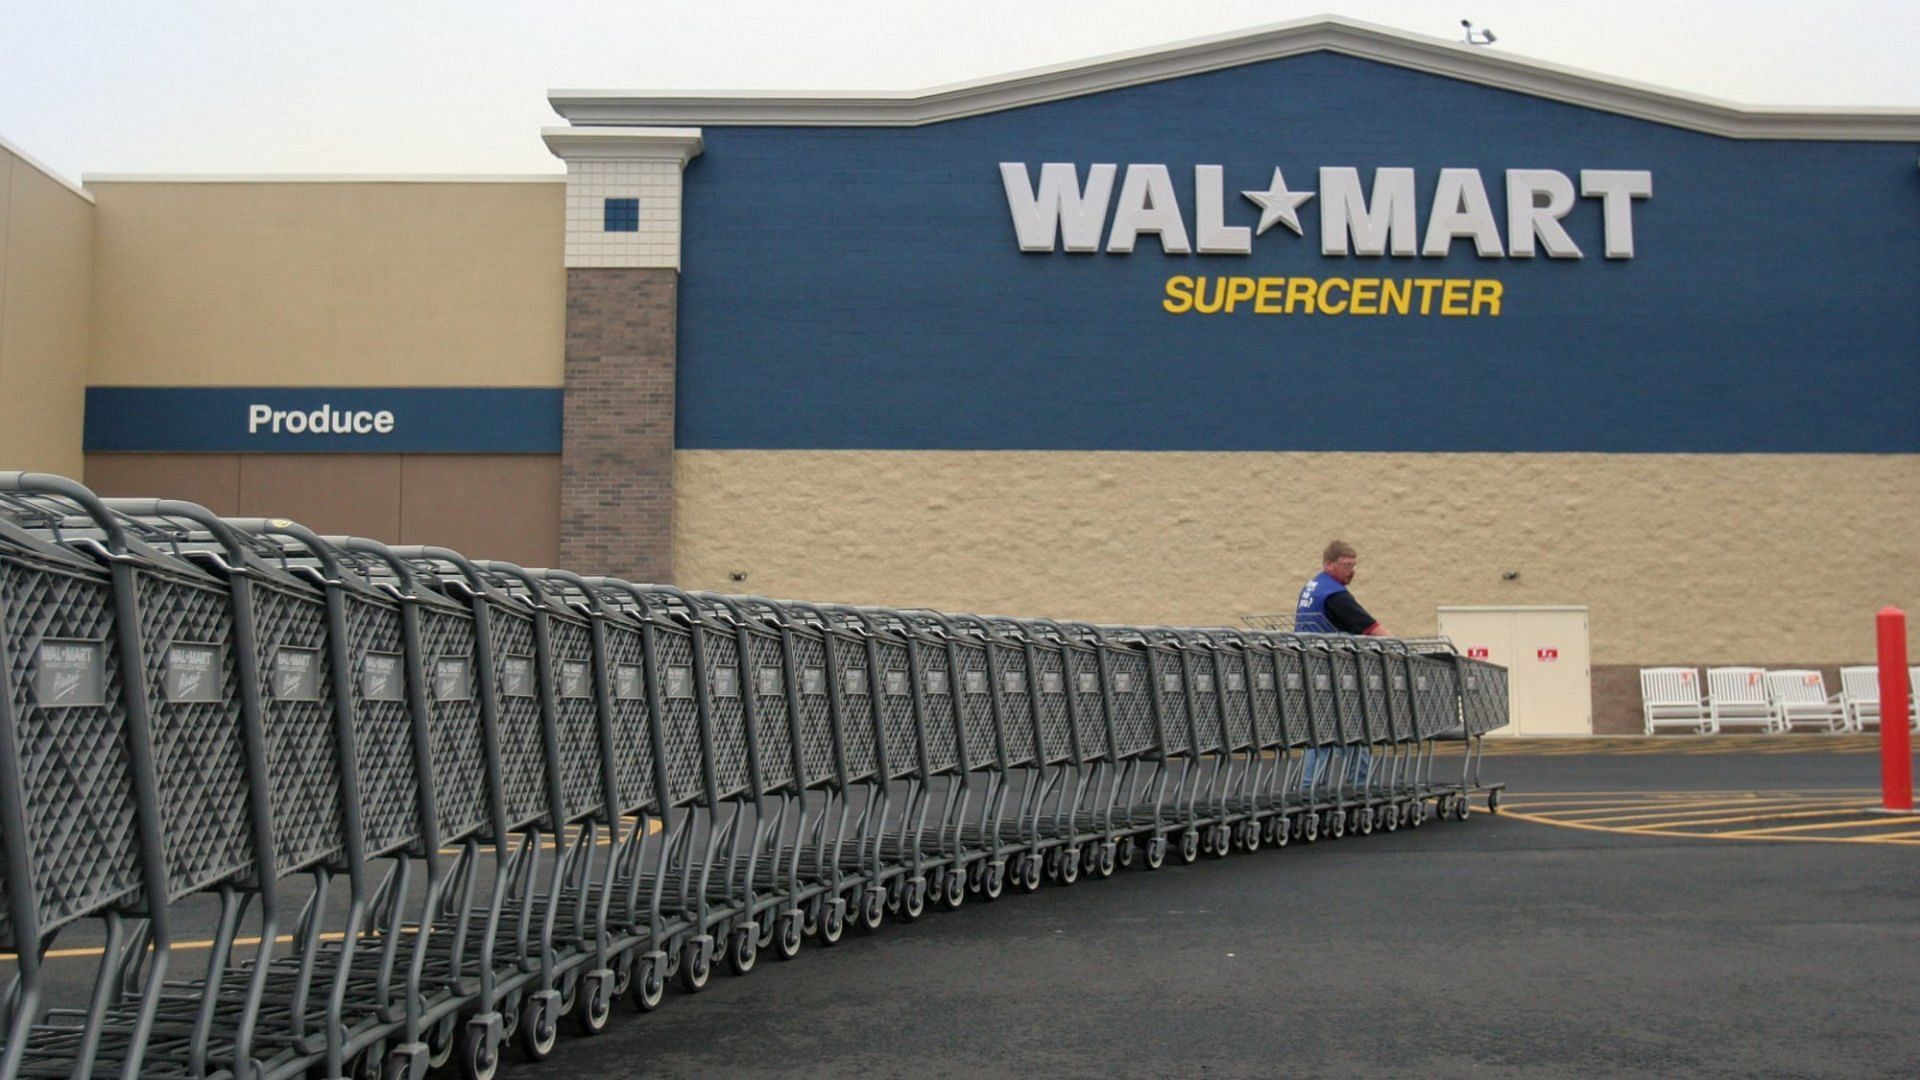 shopping carts are lined up outside a Walmart store in the United States (Image via Nikki Kahn/Getty Images)